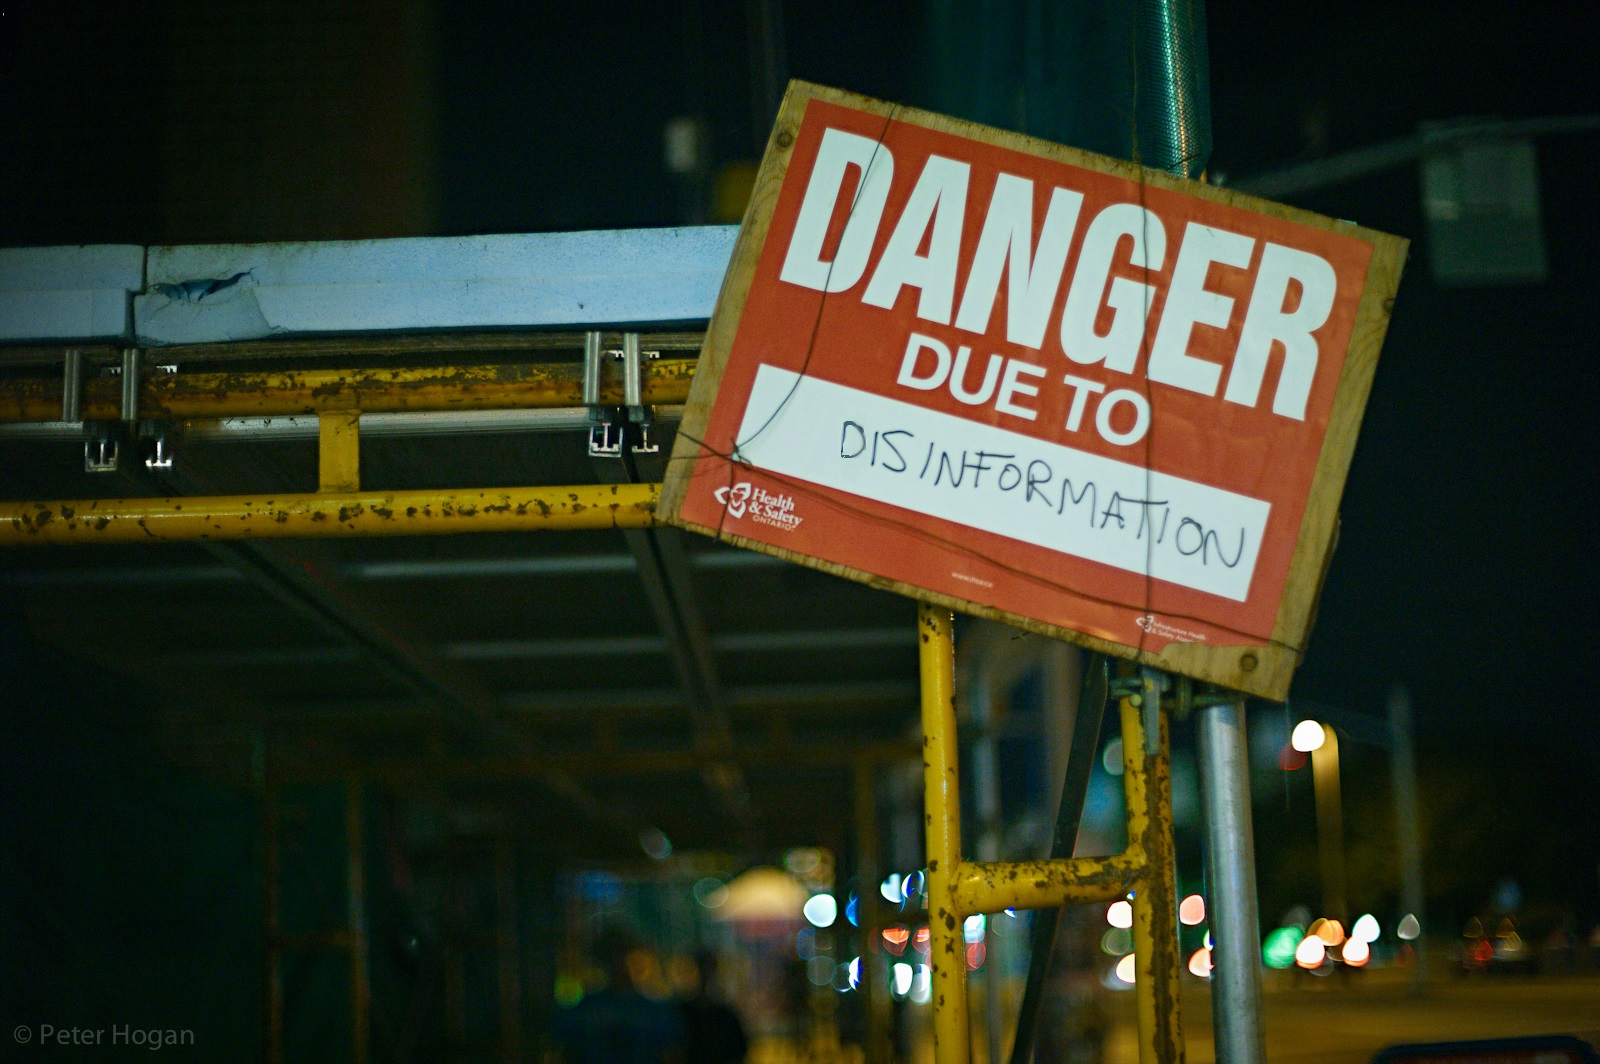 Sign which states "Danger due to disinformation"